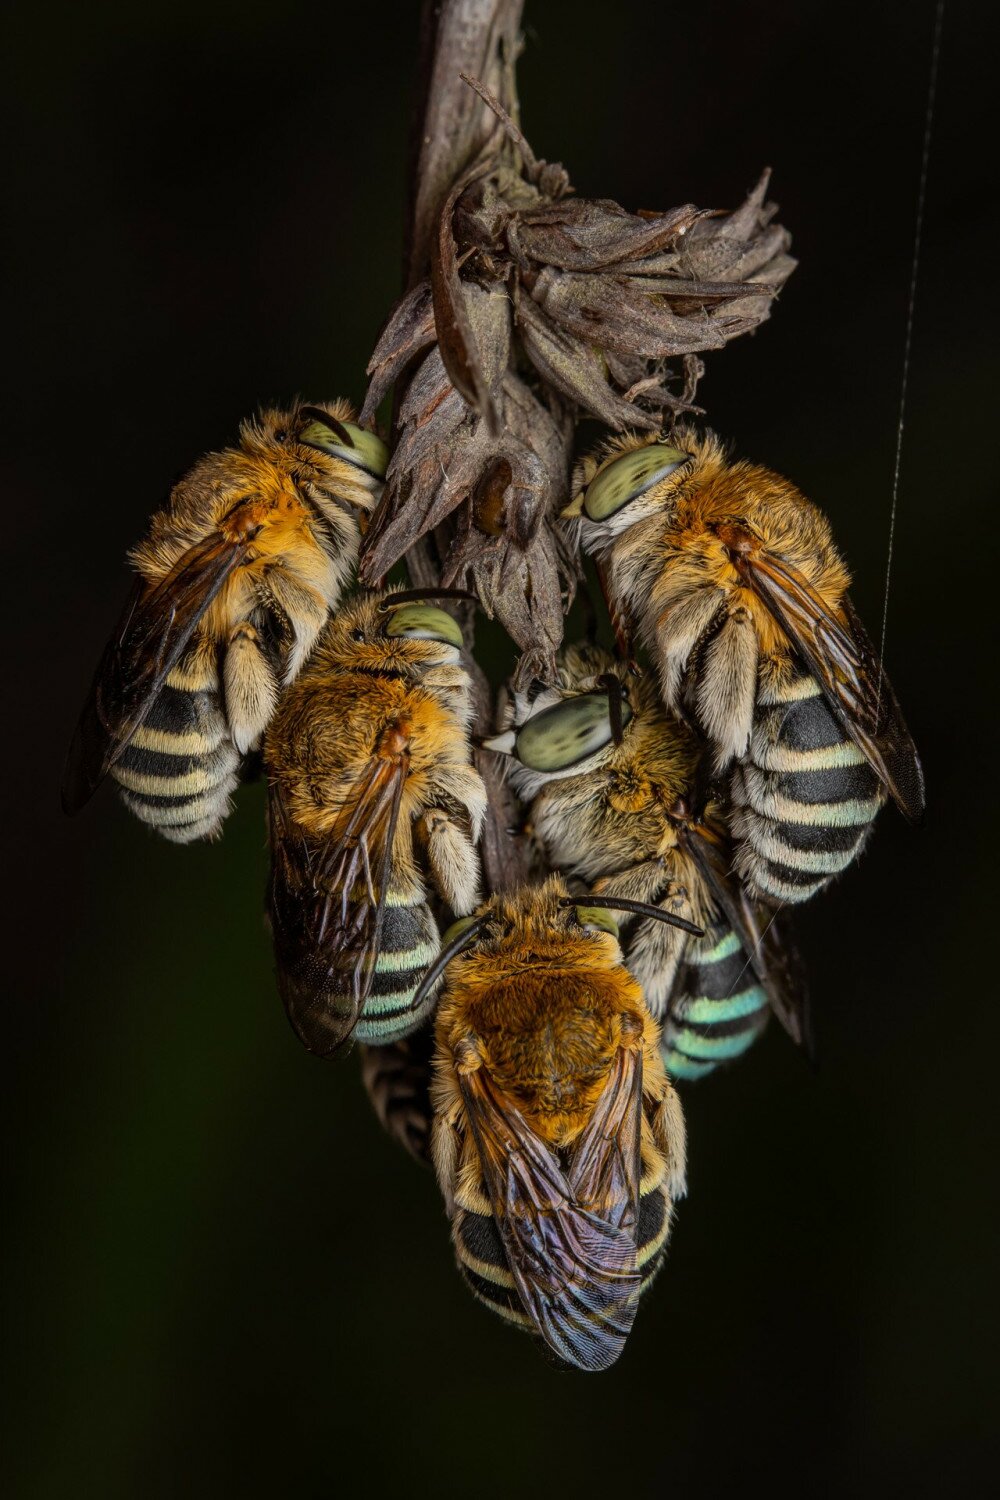 Insects-Finalist-Artur Tomaszek-Roosting-Together-CUPOTY